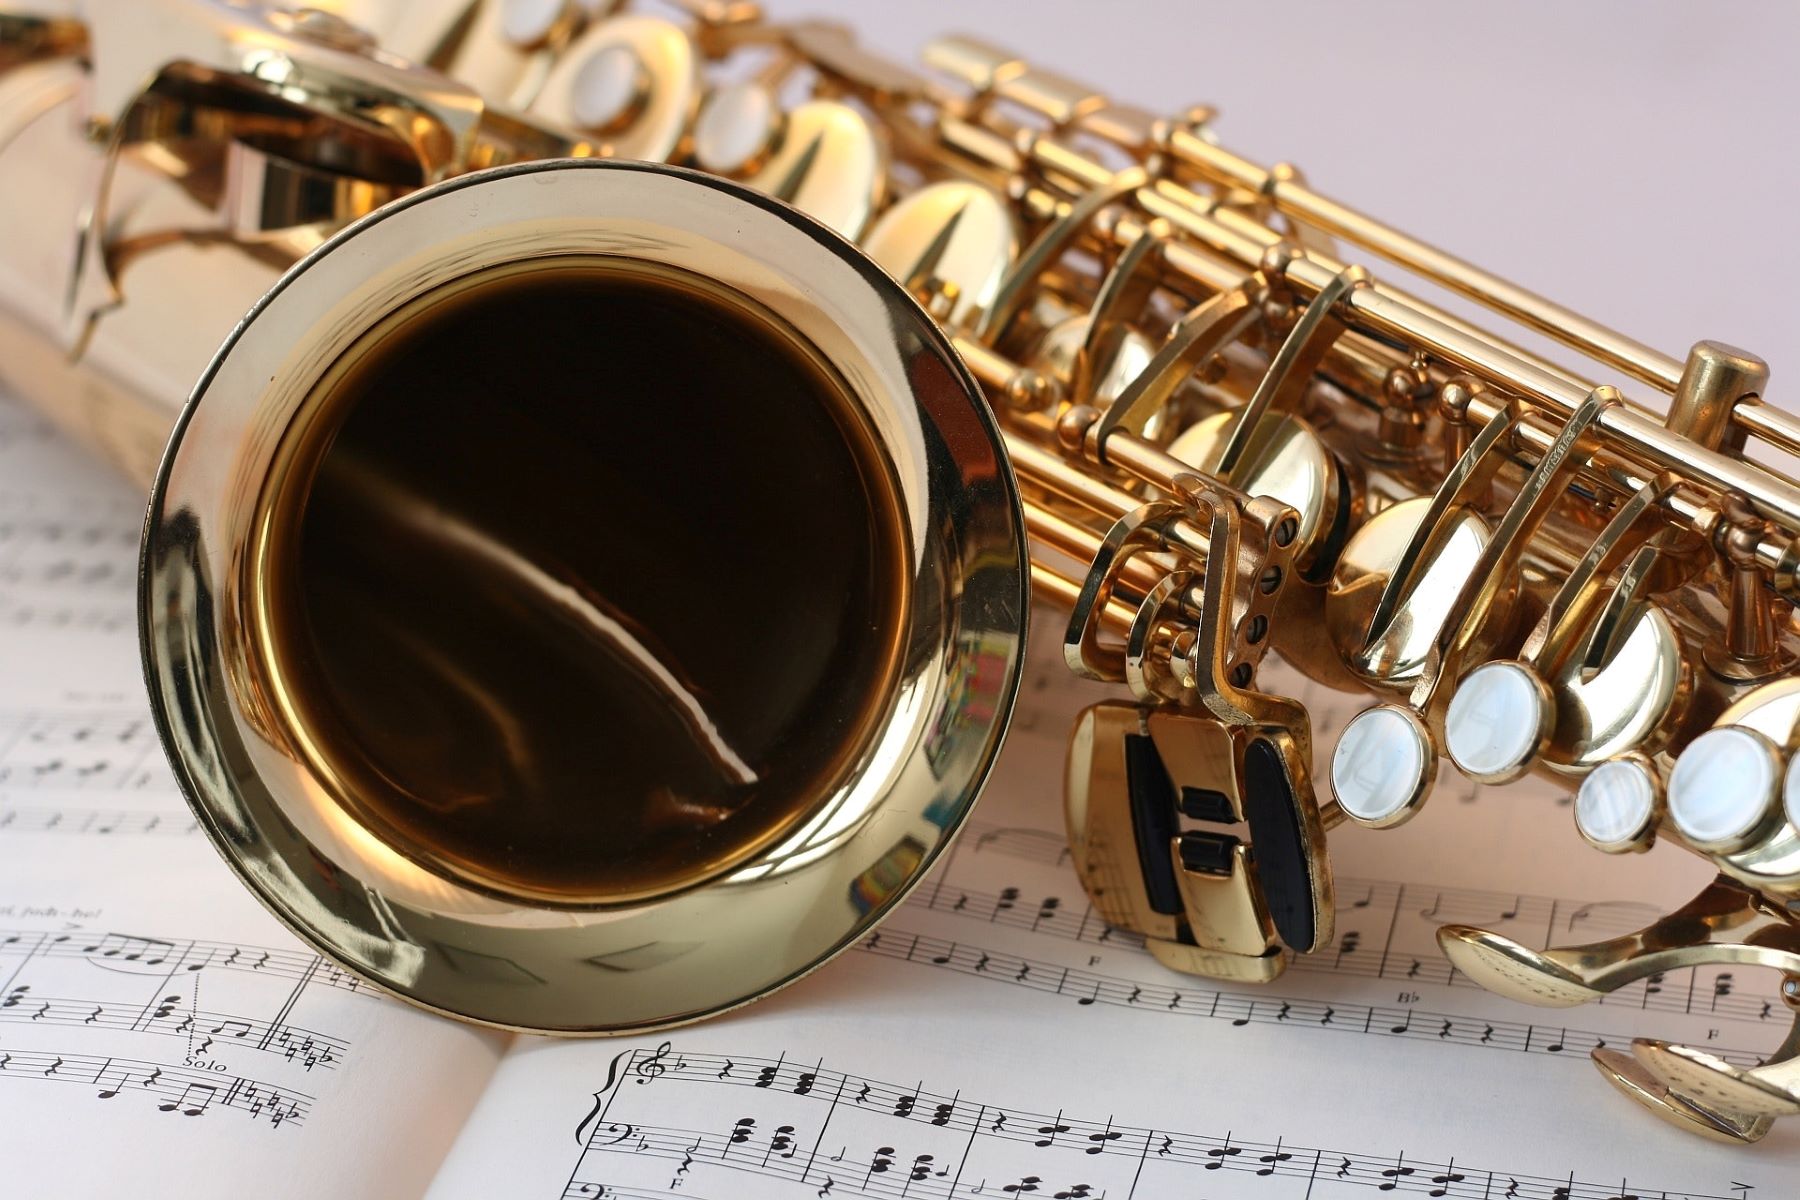 19-fun-facts-about-the-saxophone